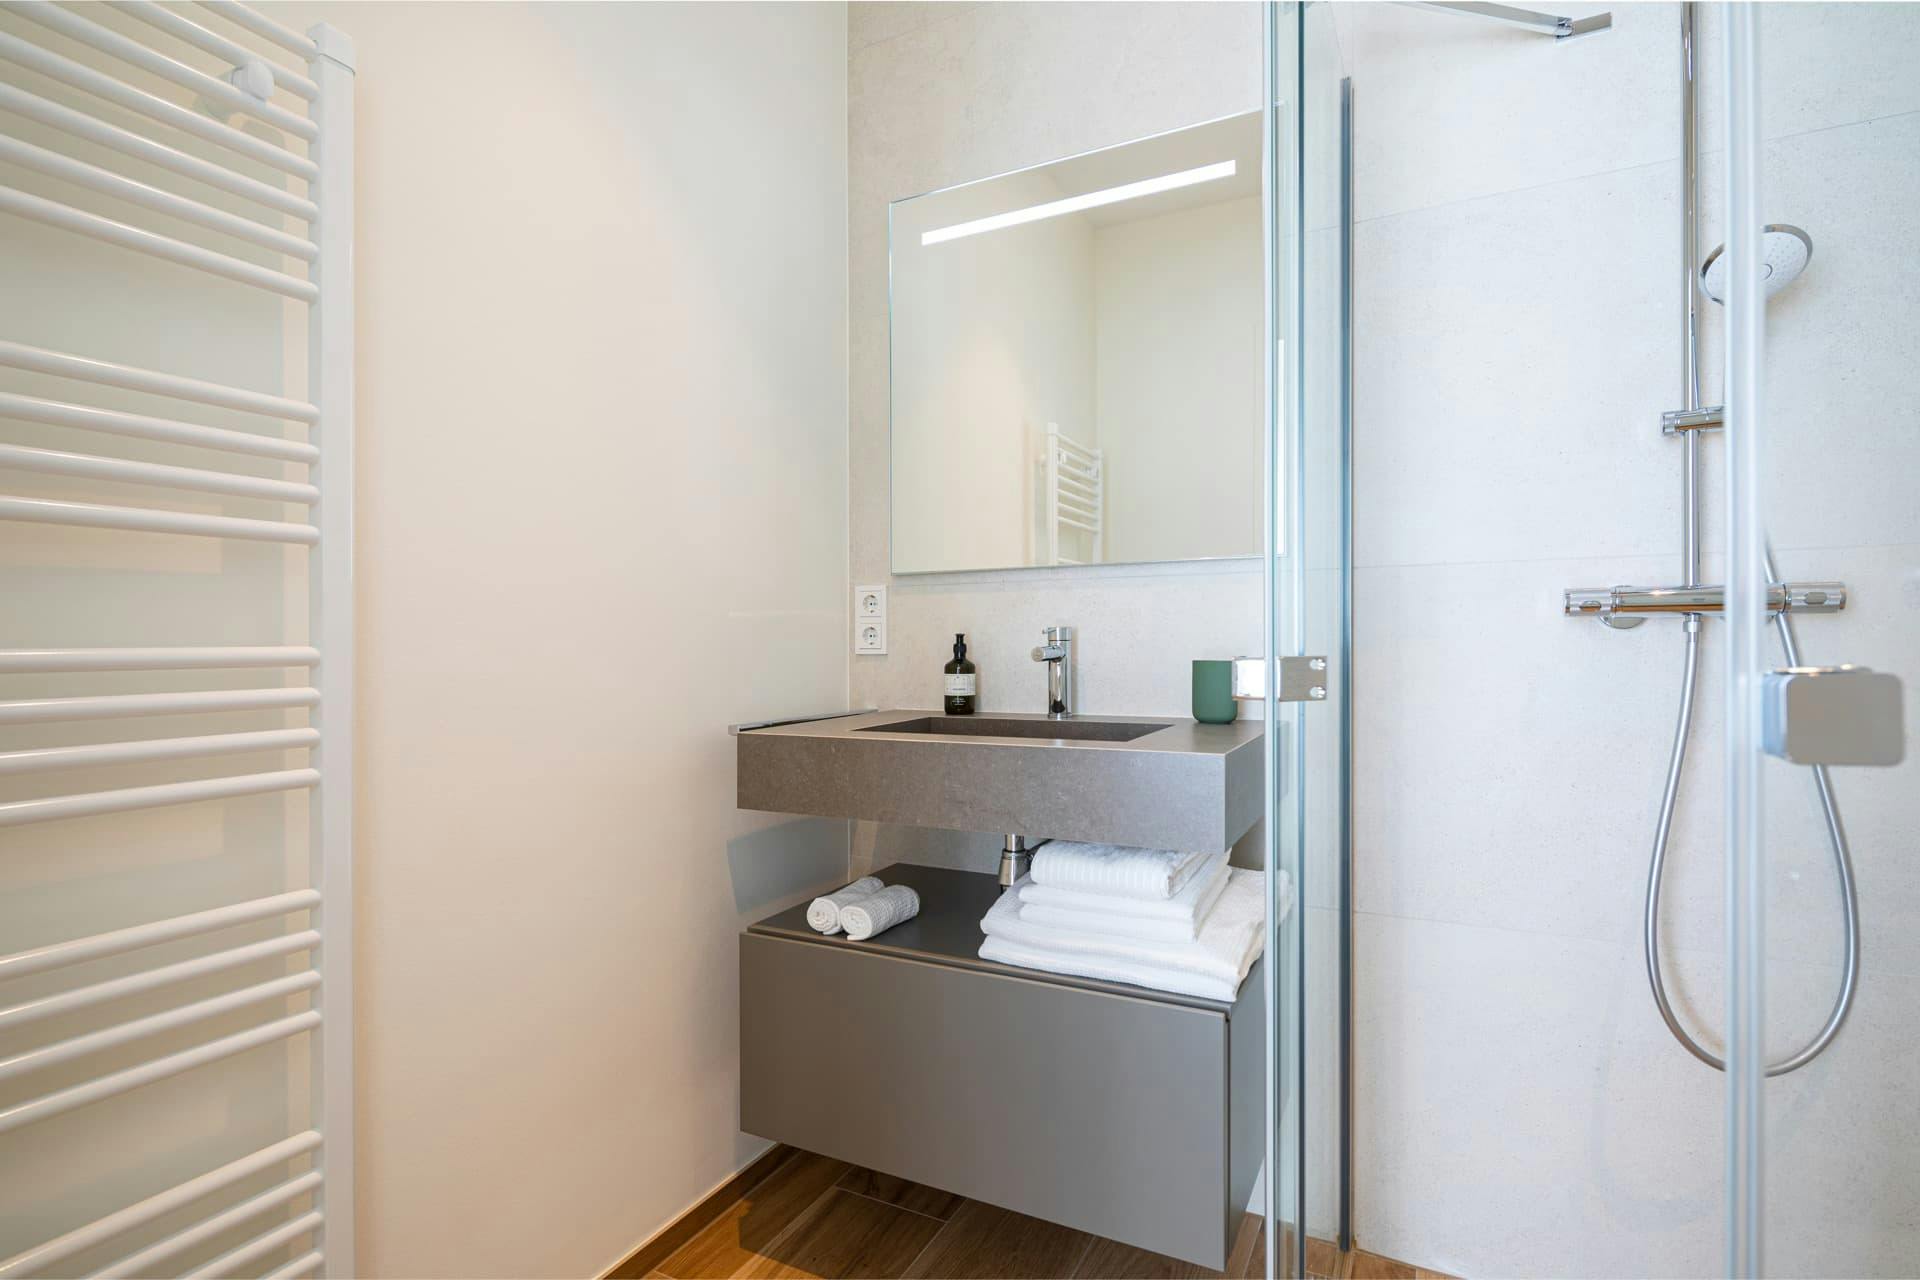 Modern sink with mirror above, white towels below. Part of the shower is visible on the right. Two electric sockets are on the left. Reflected in the mirror is a heating radiator. 
